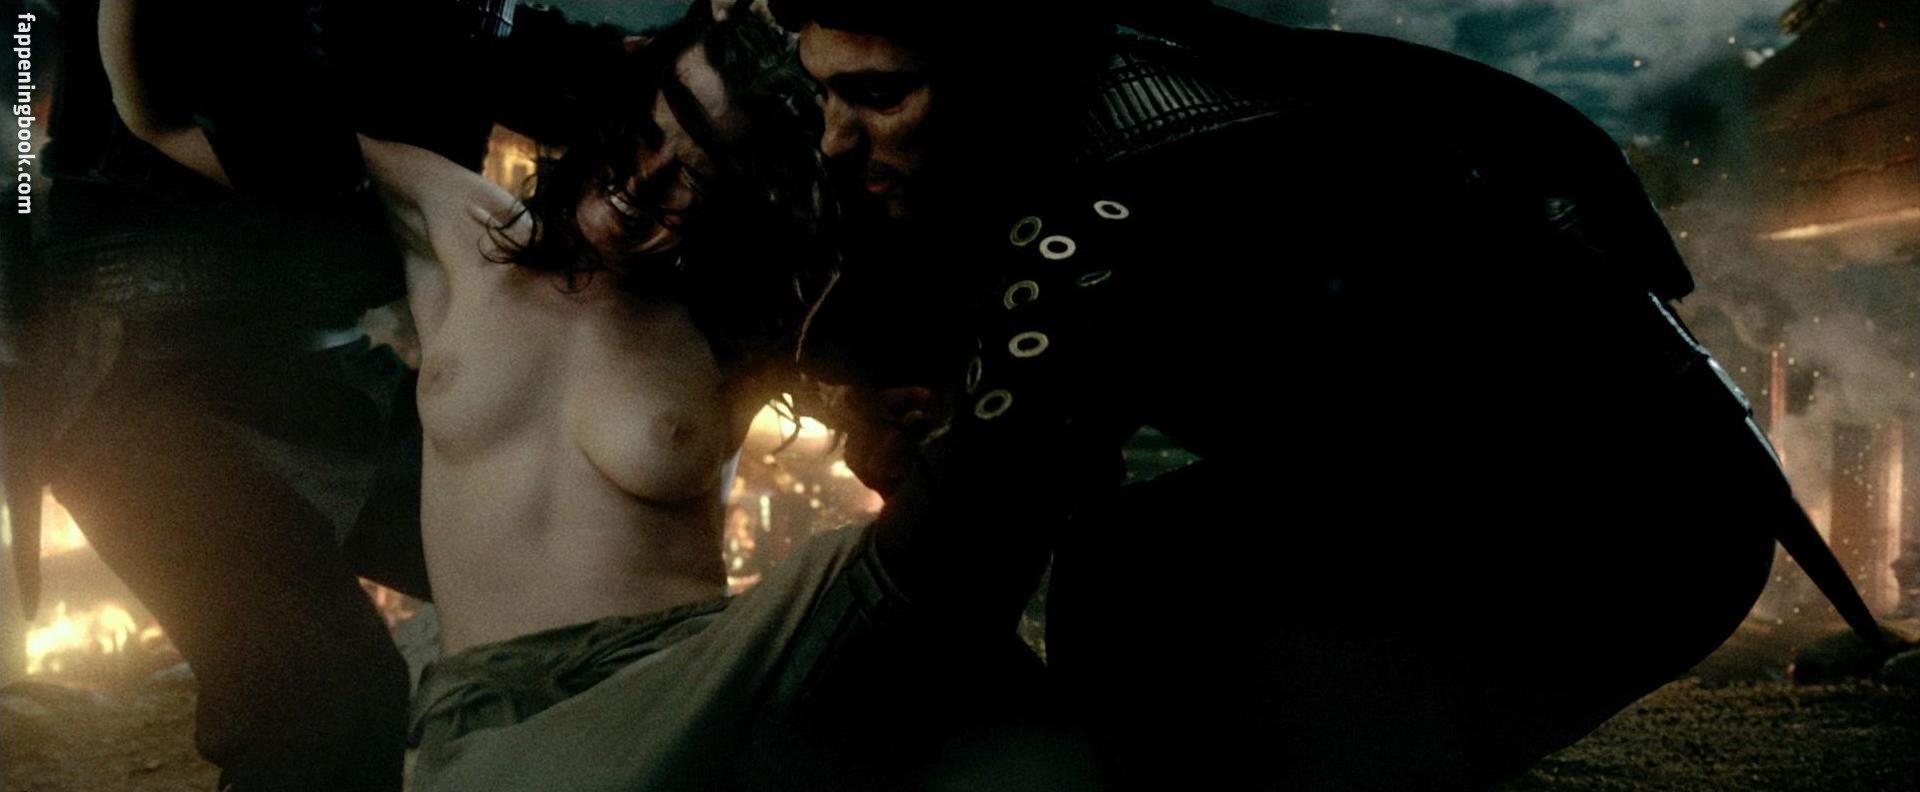 Nude Roles in Movies: 300: Rise of an Empire (2014) .